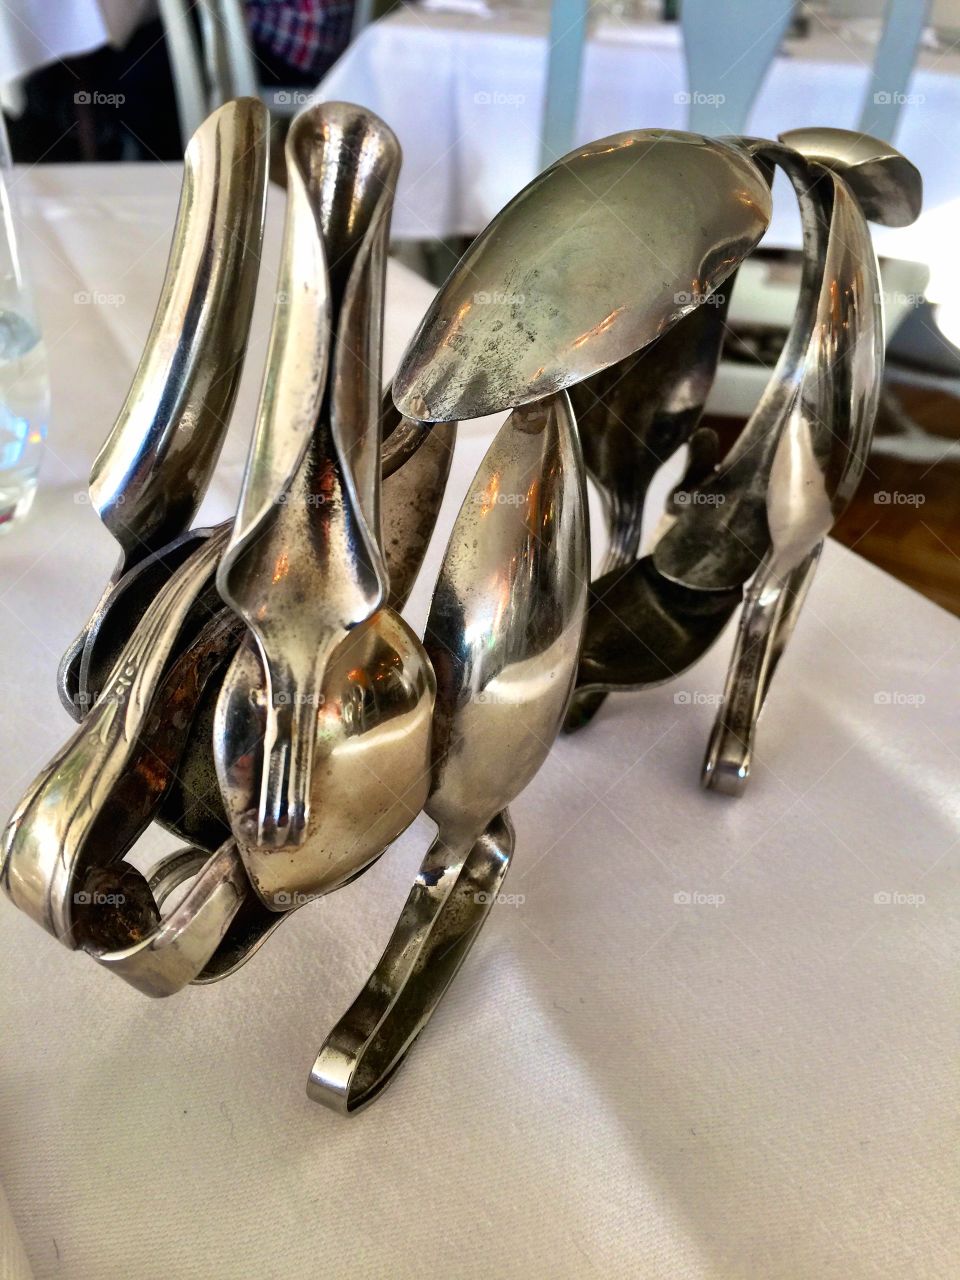 Rabbit with spoons 